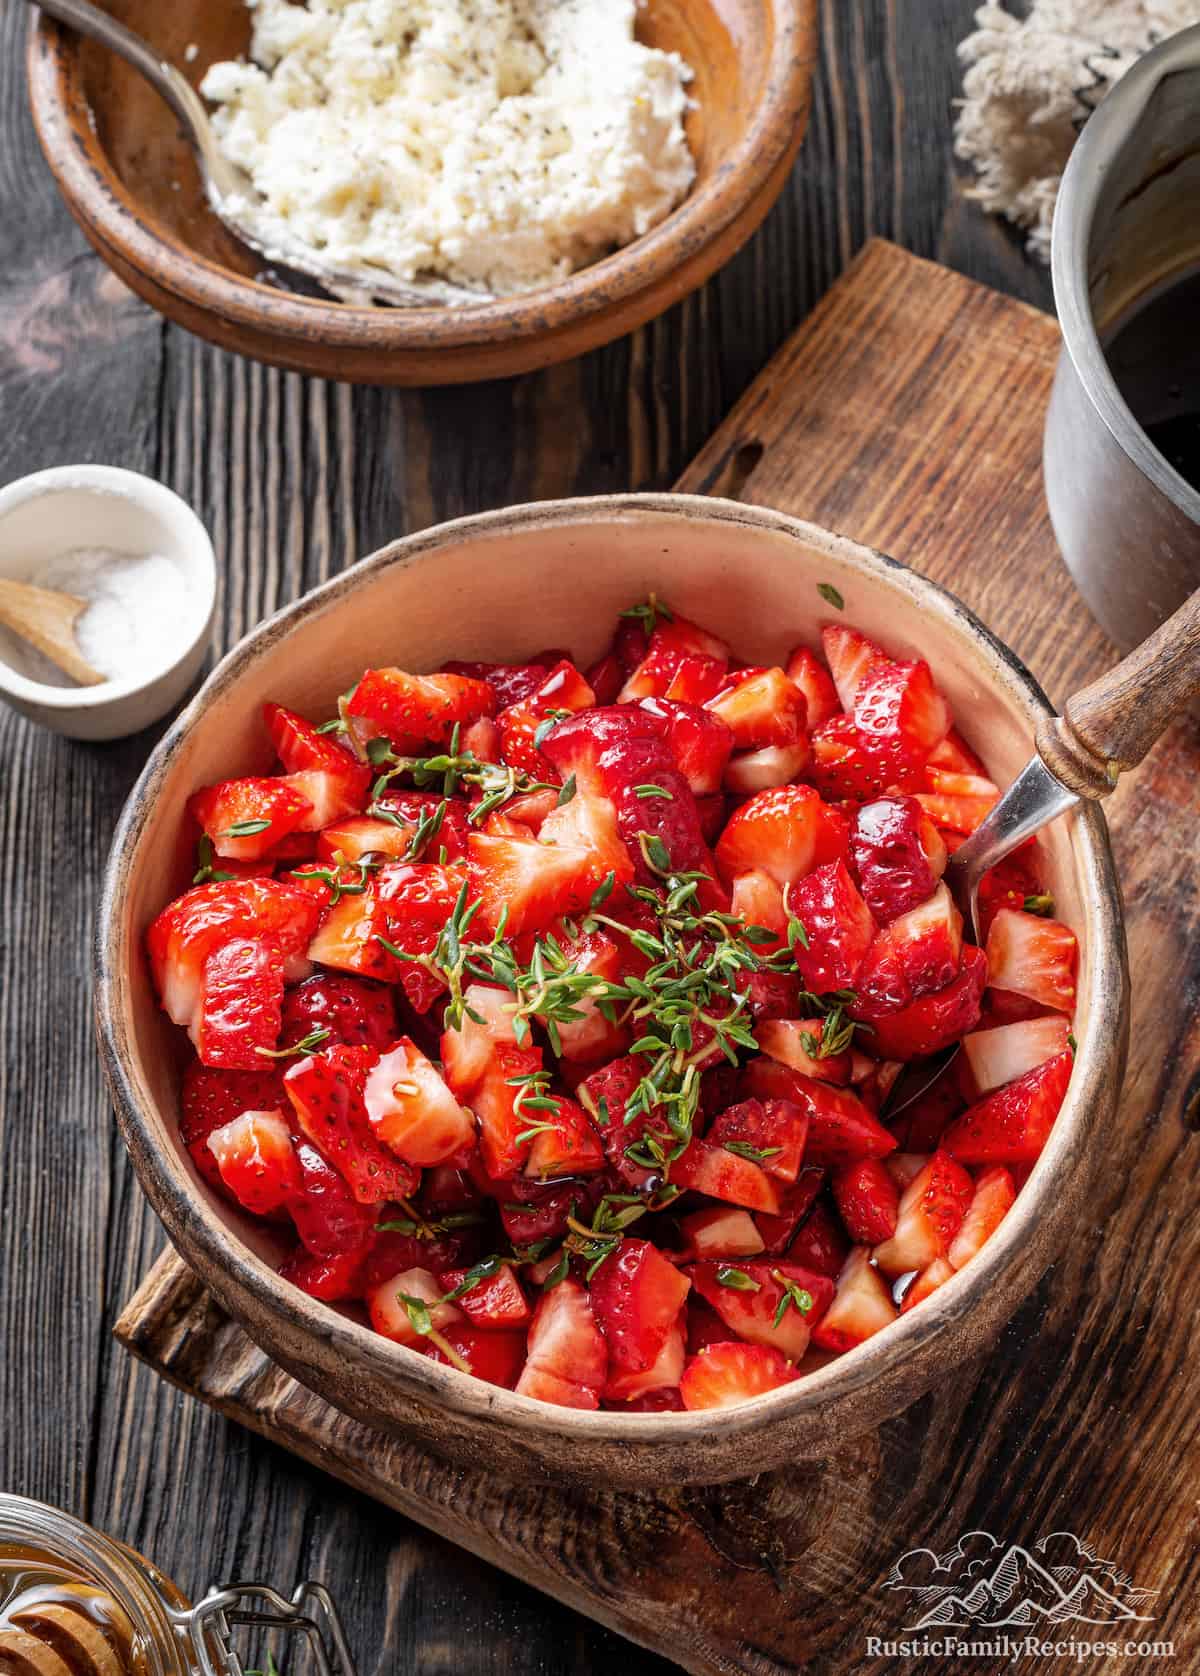 A bowl of strawberries next to a bowl of goat cheese for bruschetta